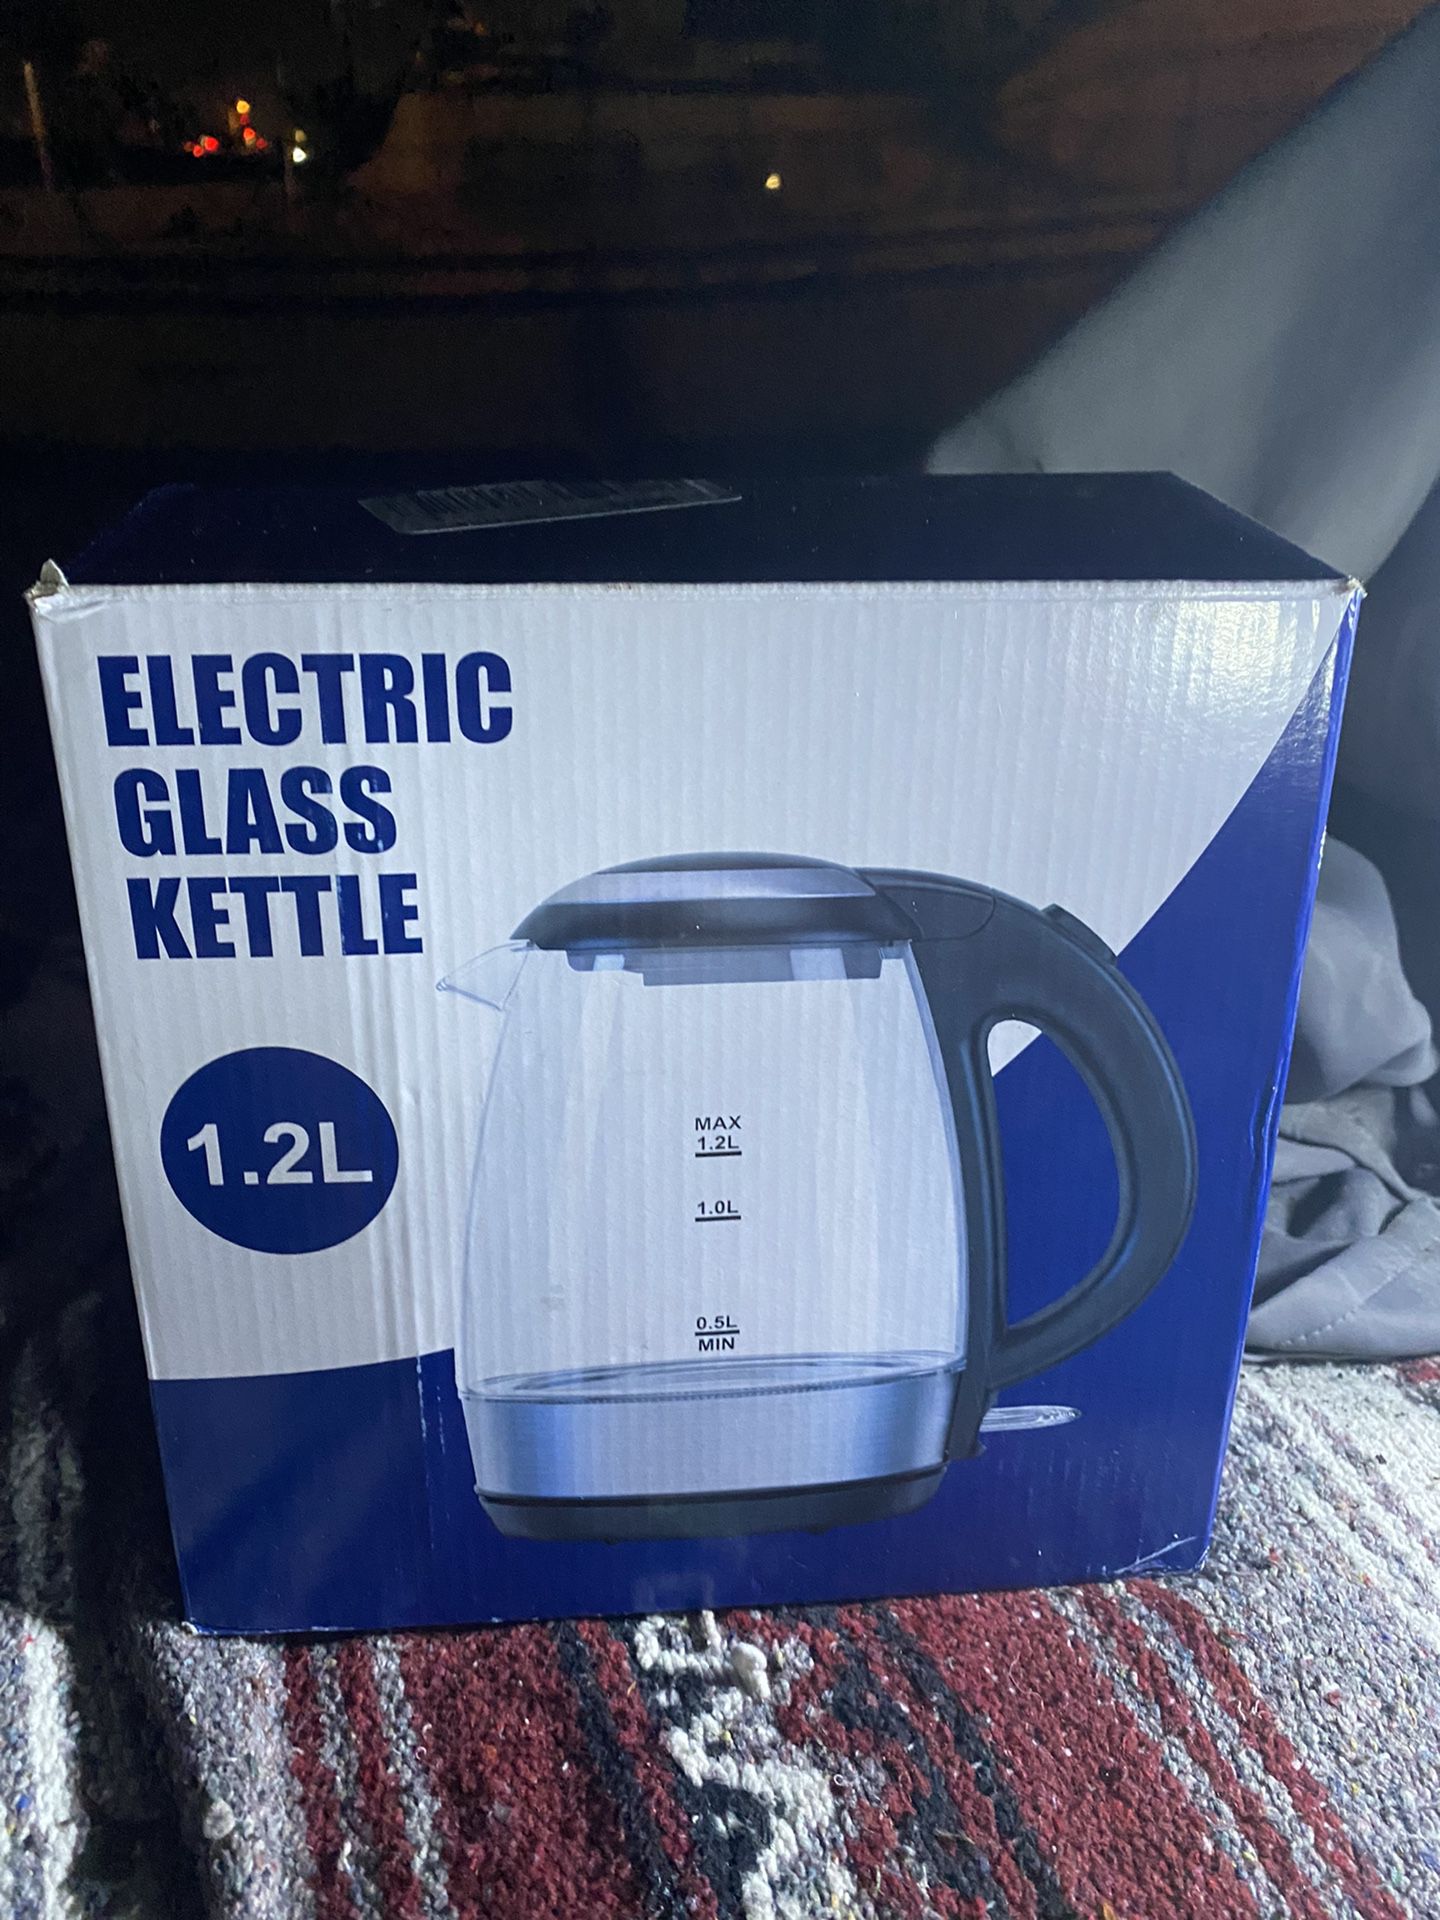 * SALE * 1/2 OFF * Everything Must Go!! Electric Glass Kettle 